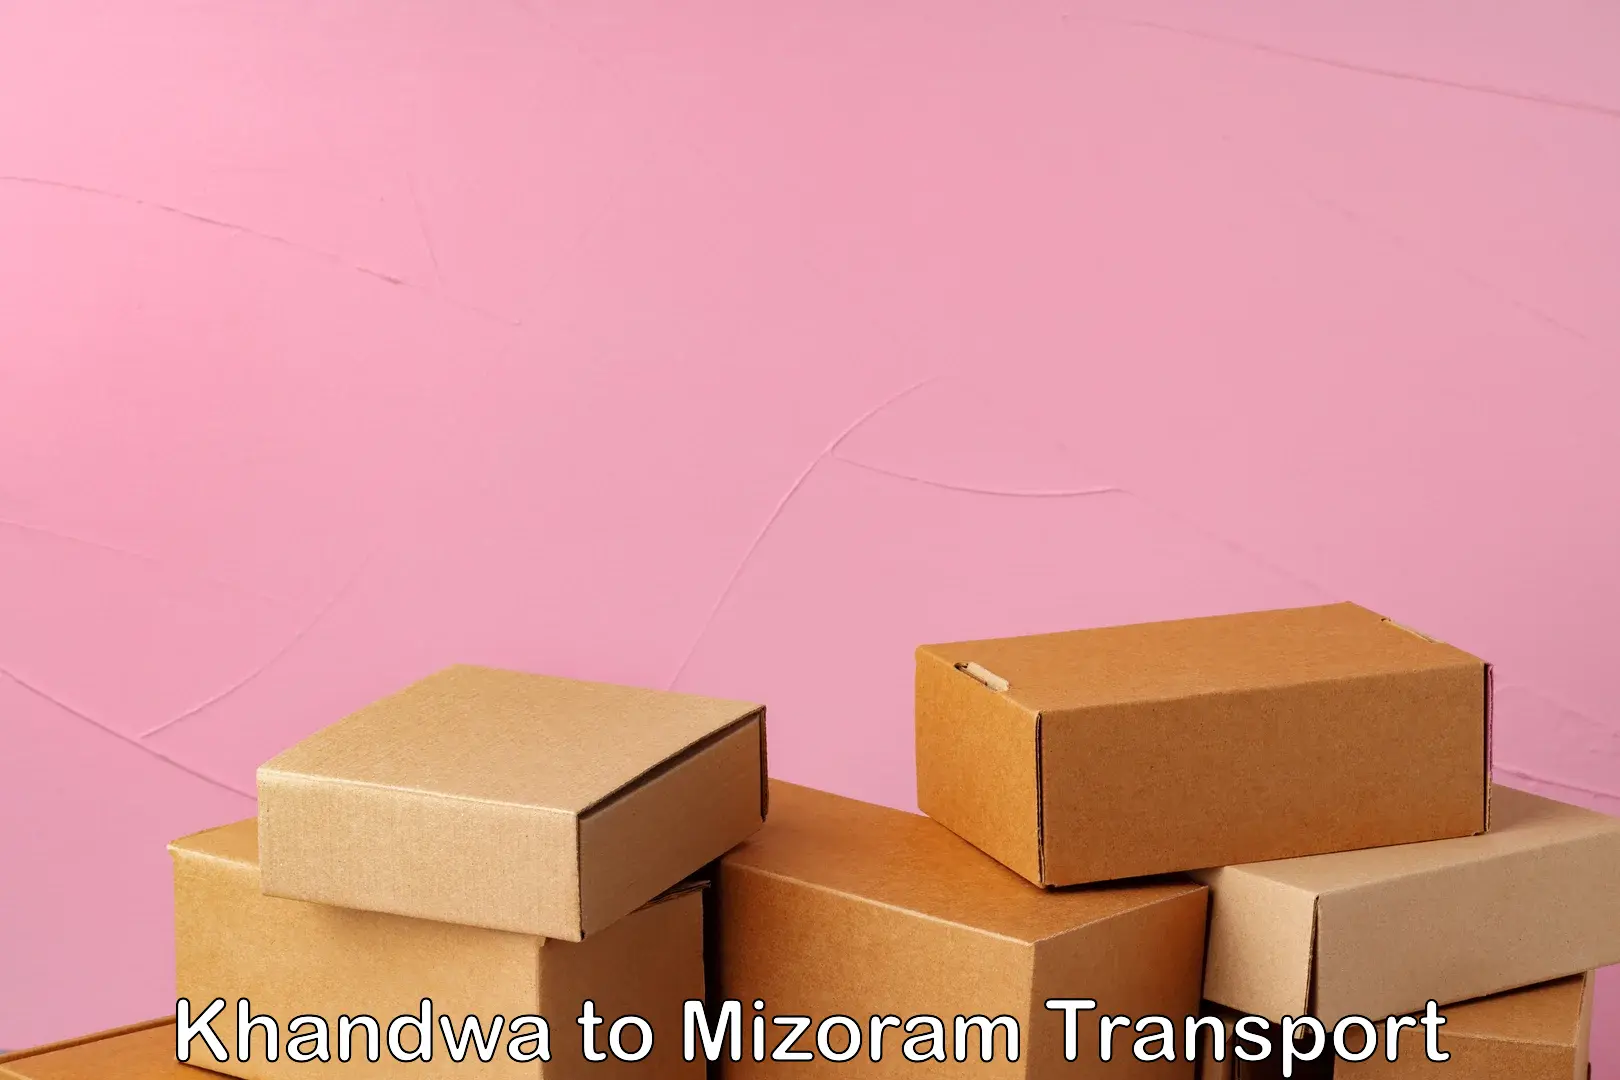 Transport bike from one state to another Khandwa to Mizoram